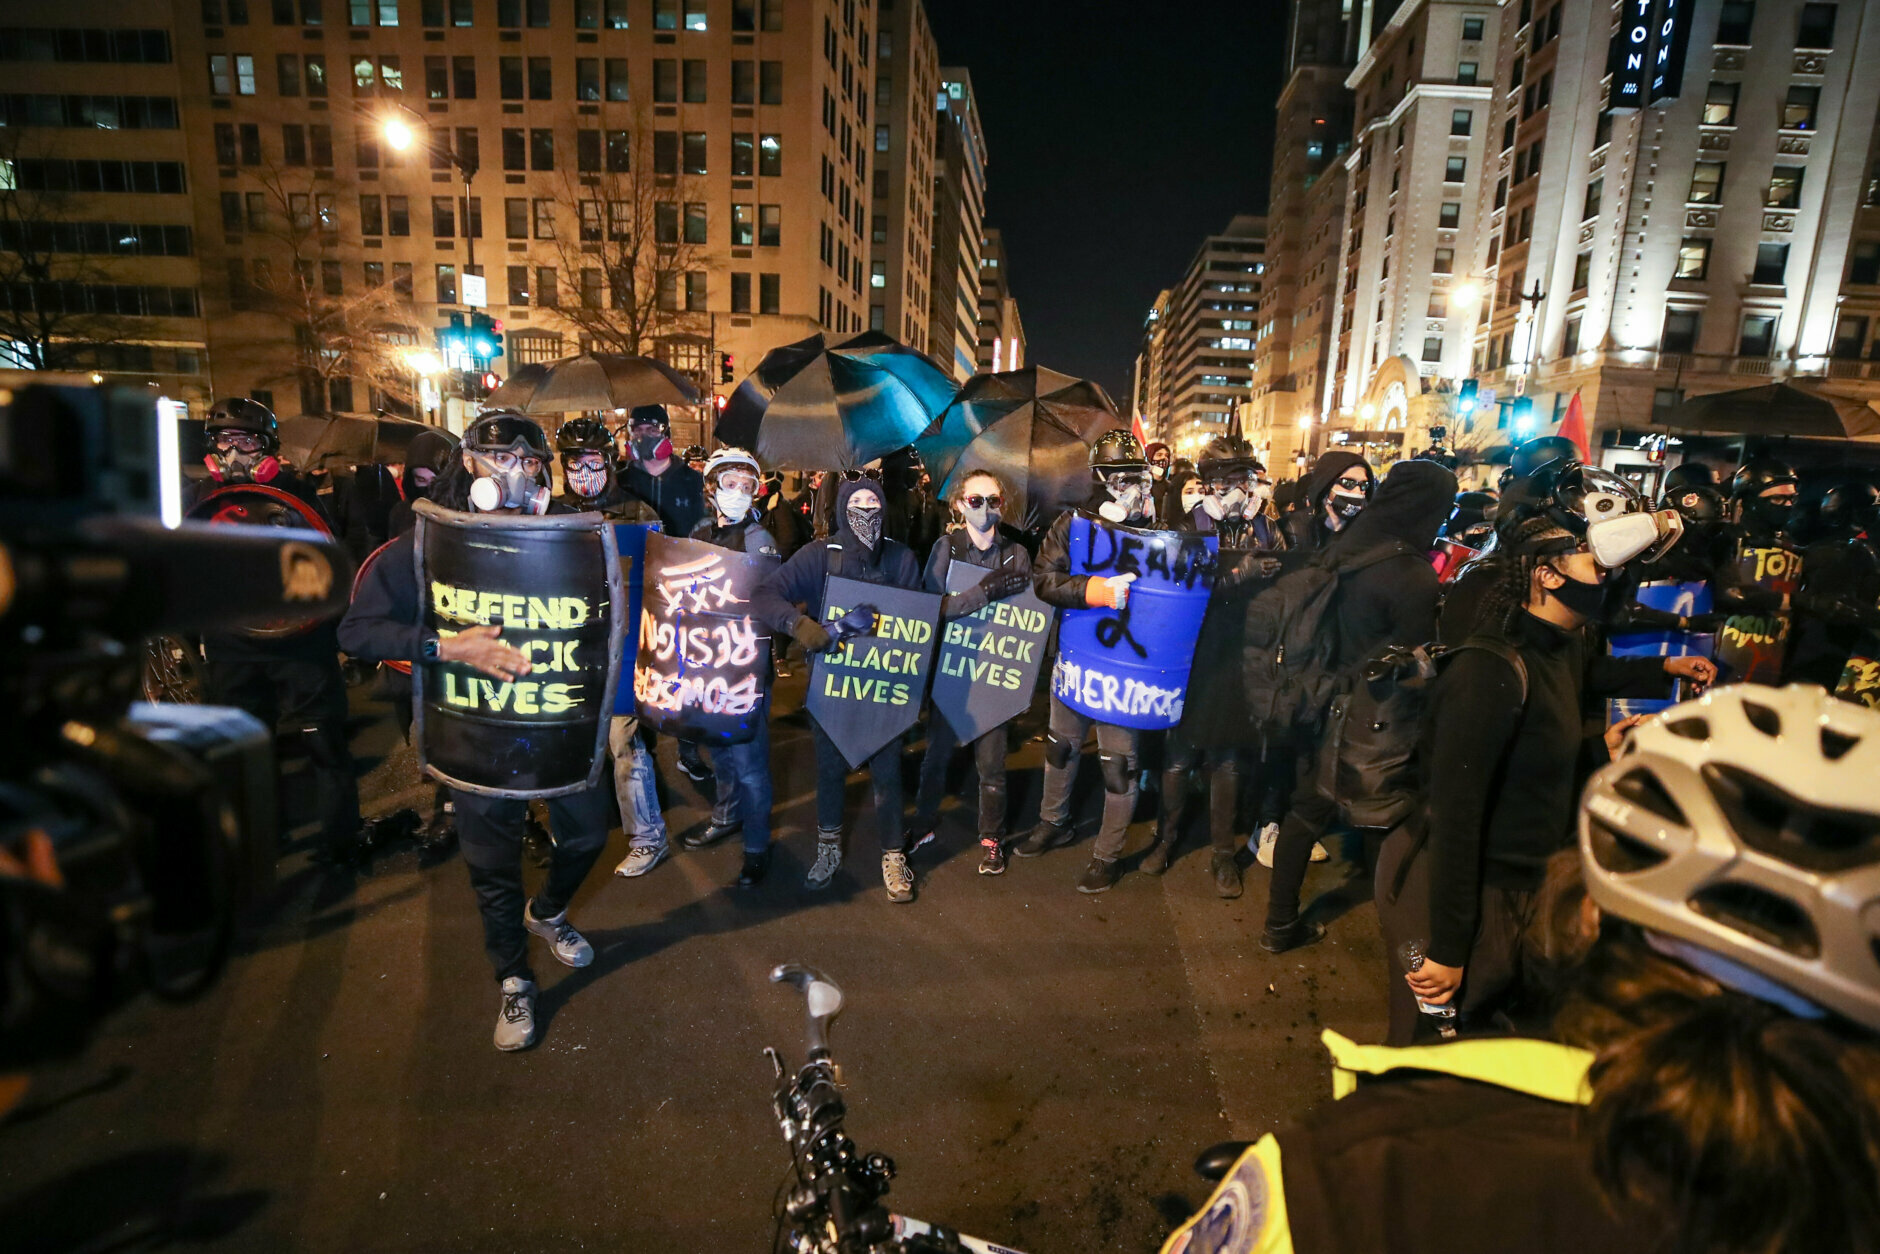 WASHINGTON, USA - DECEMBER 12: Proud Boys and Antifa fight after the "Million MAGA March" from Freedom Plaza to the US Capitol in Washington, DC, United States on December 12, 2020. Rally held to back President Donald Trump's unsubstantiated claims of voter fraud in the US election. (Photo by Tayfun Coskun/Anadolu Agency via Getty Images)